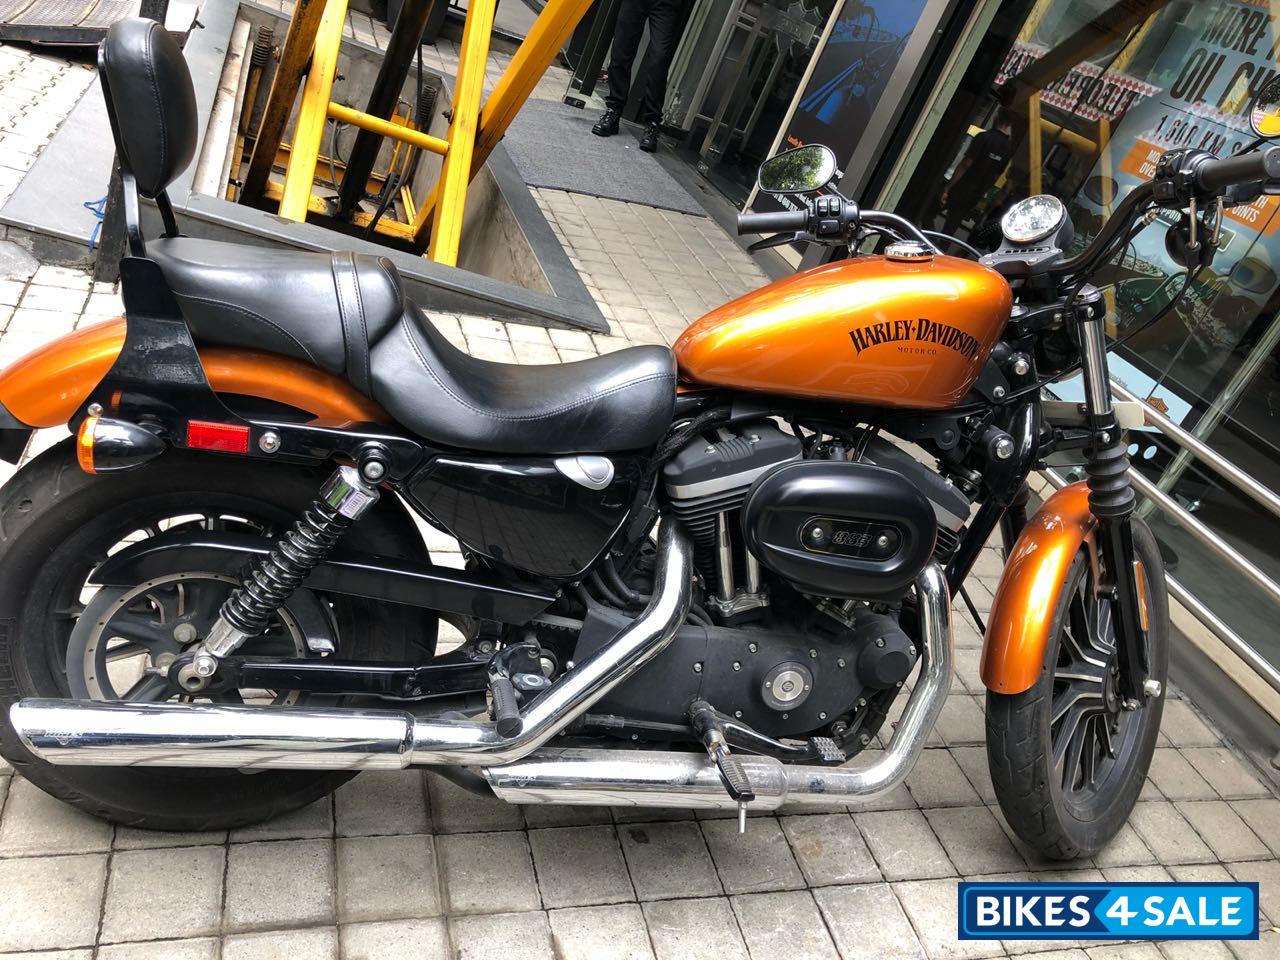 Used 2014 Model Harley Davidson Iron 883 For Sale In Bangalore Id 187288 Bikes4sale